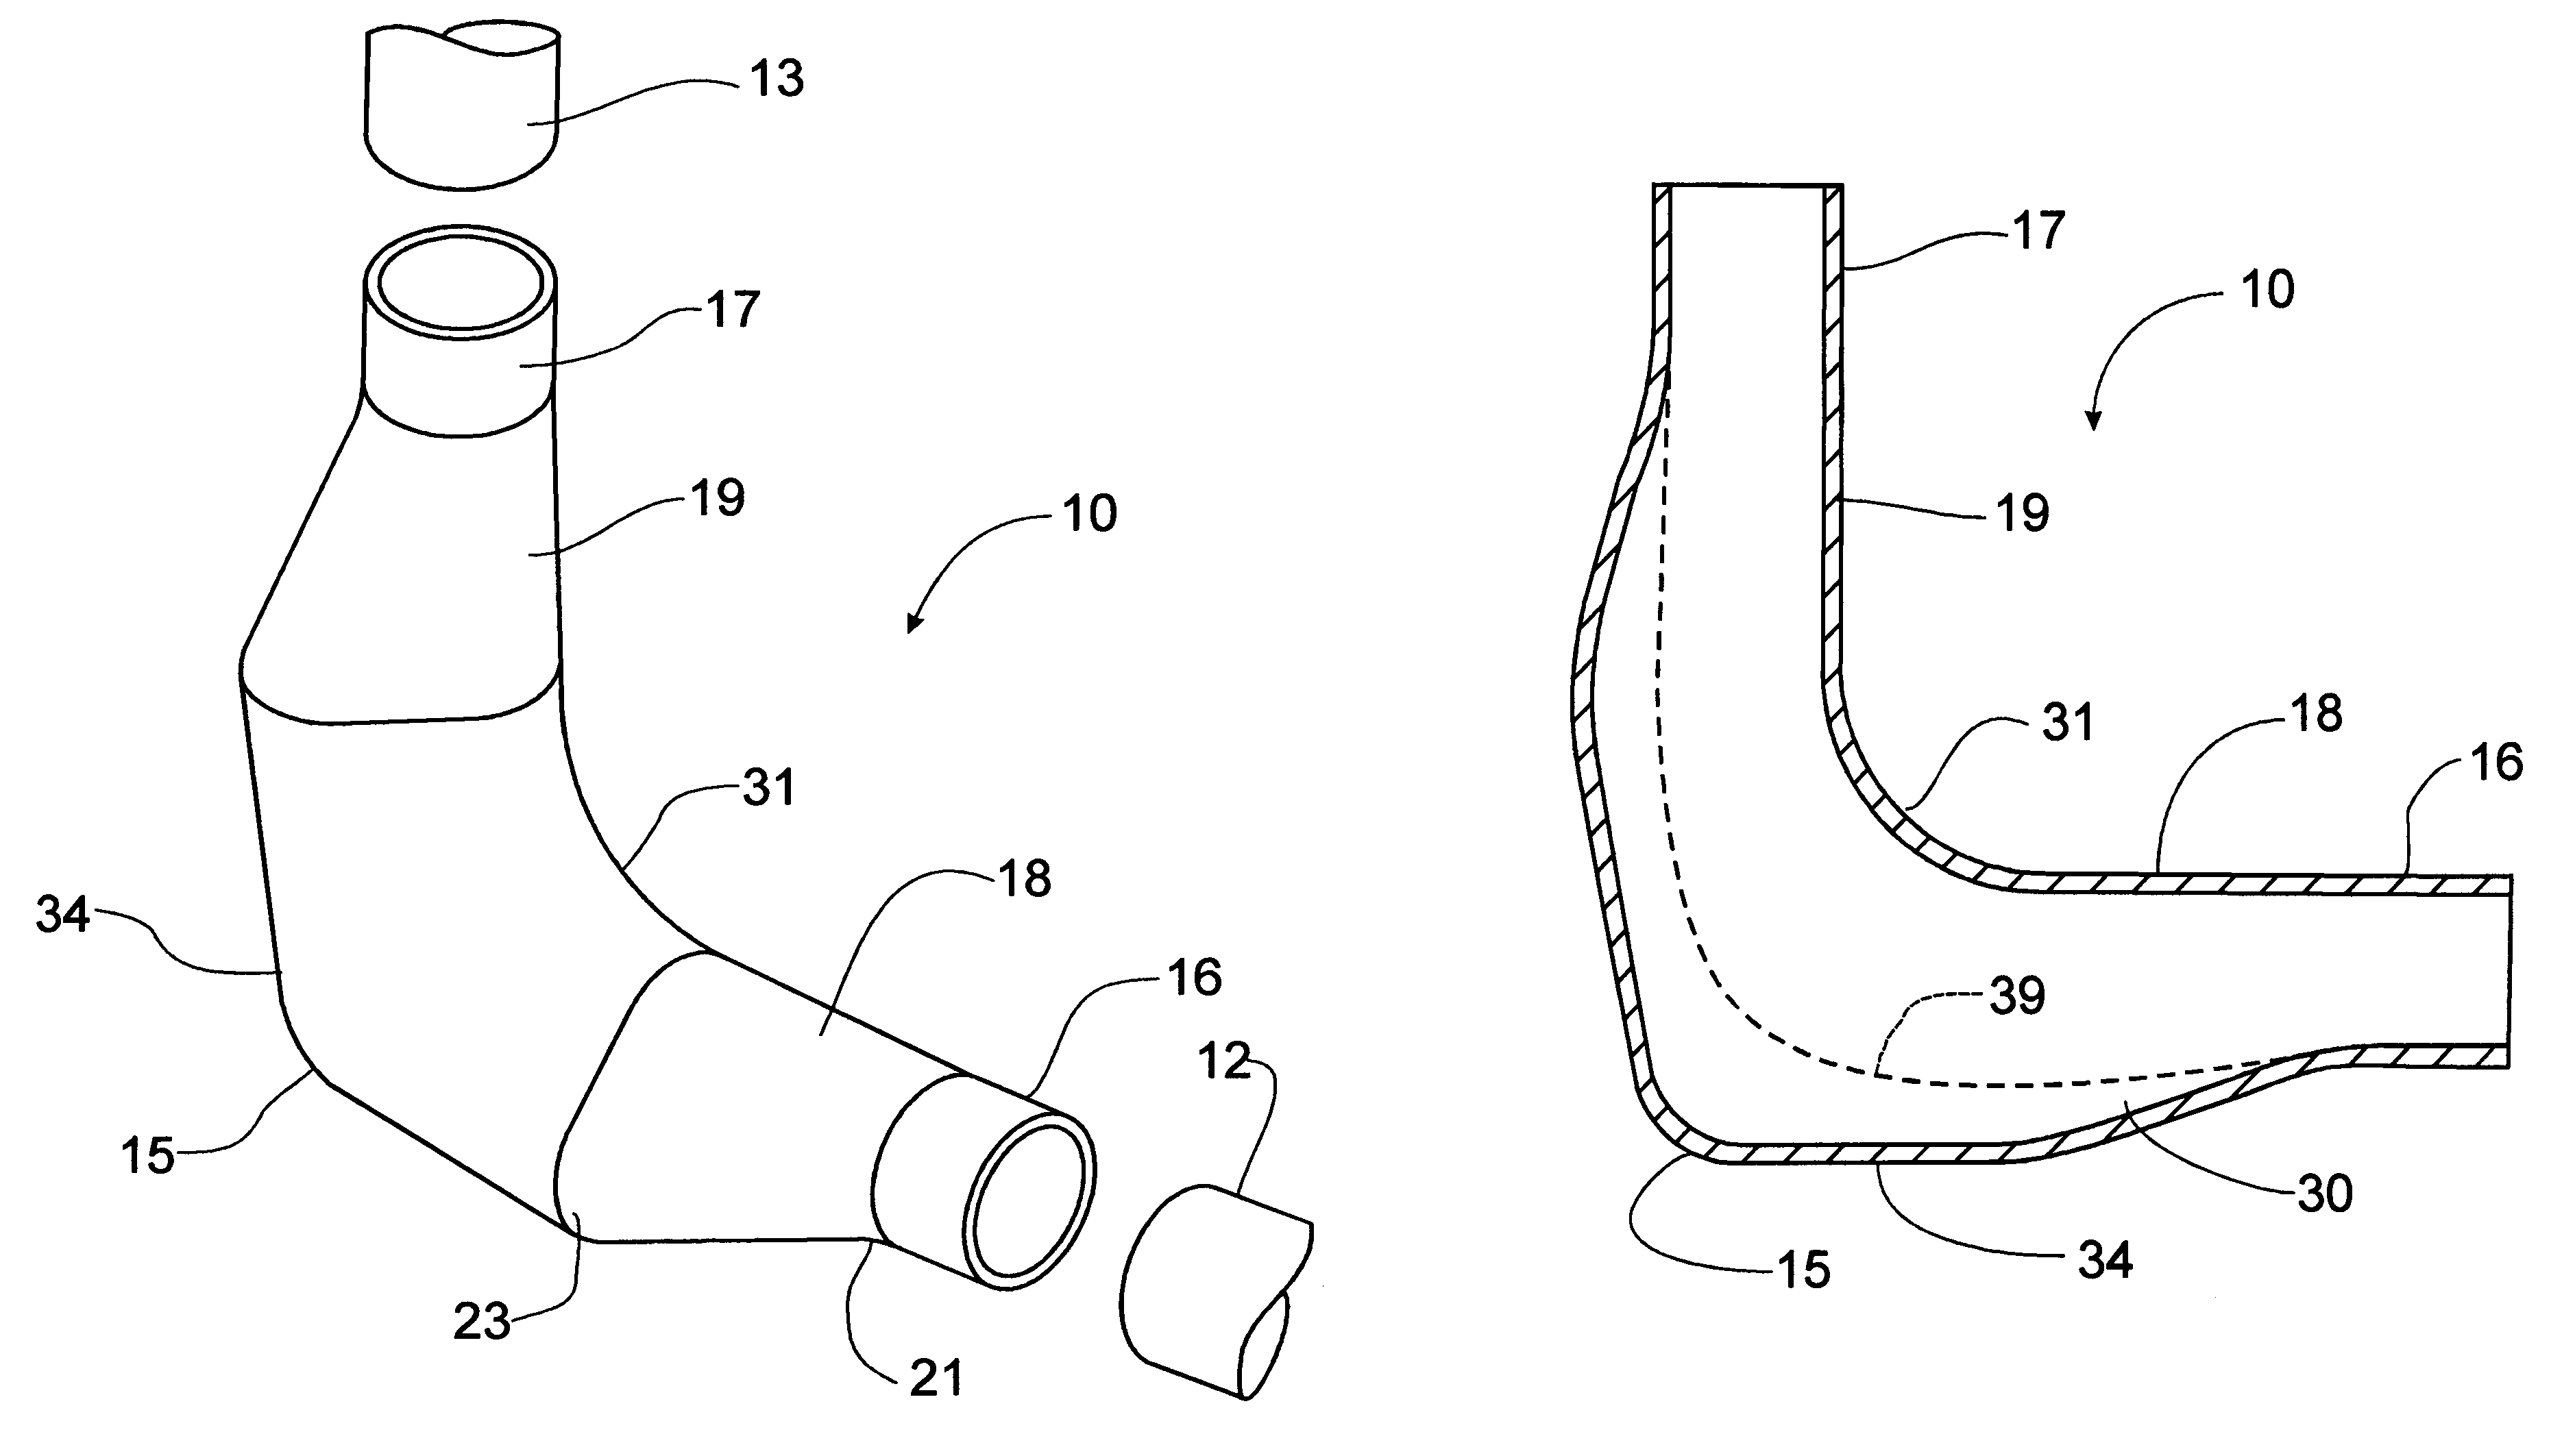 Elbow fitting for pneumatic transport system